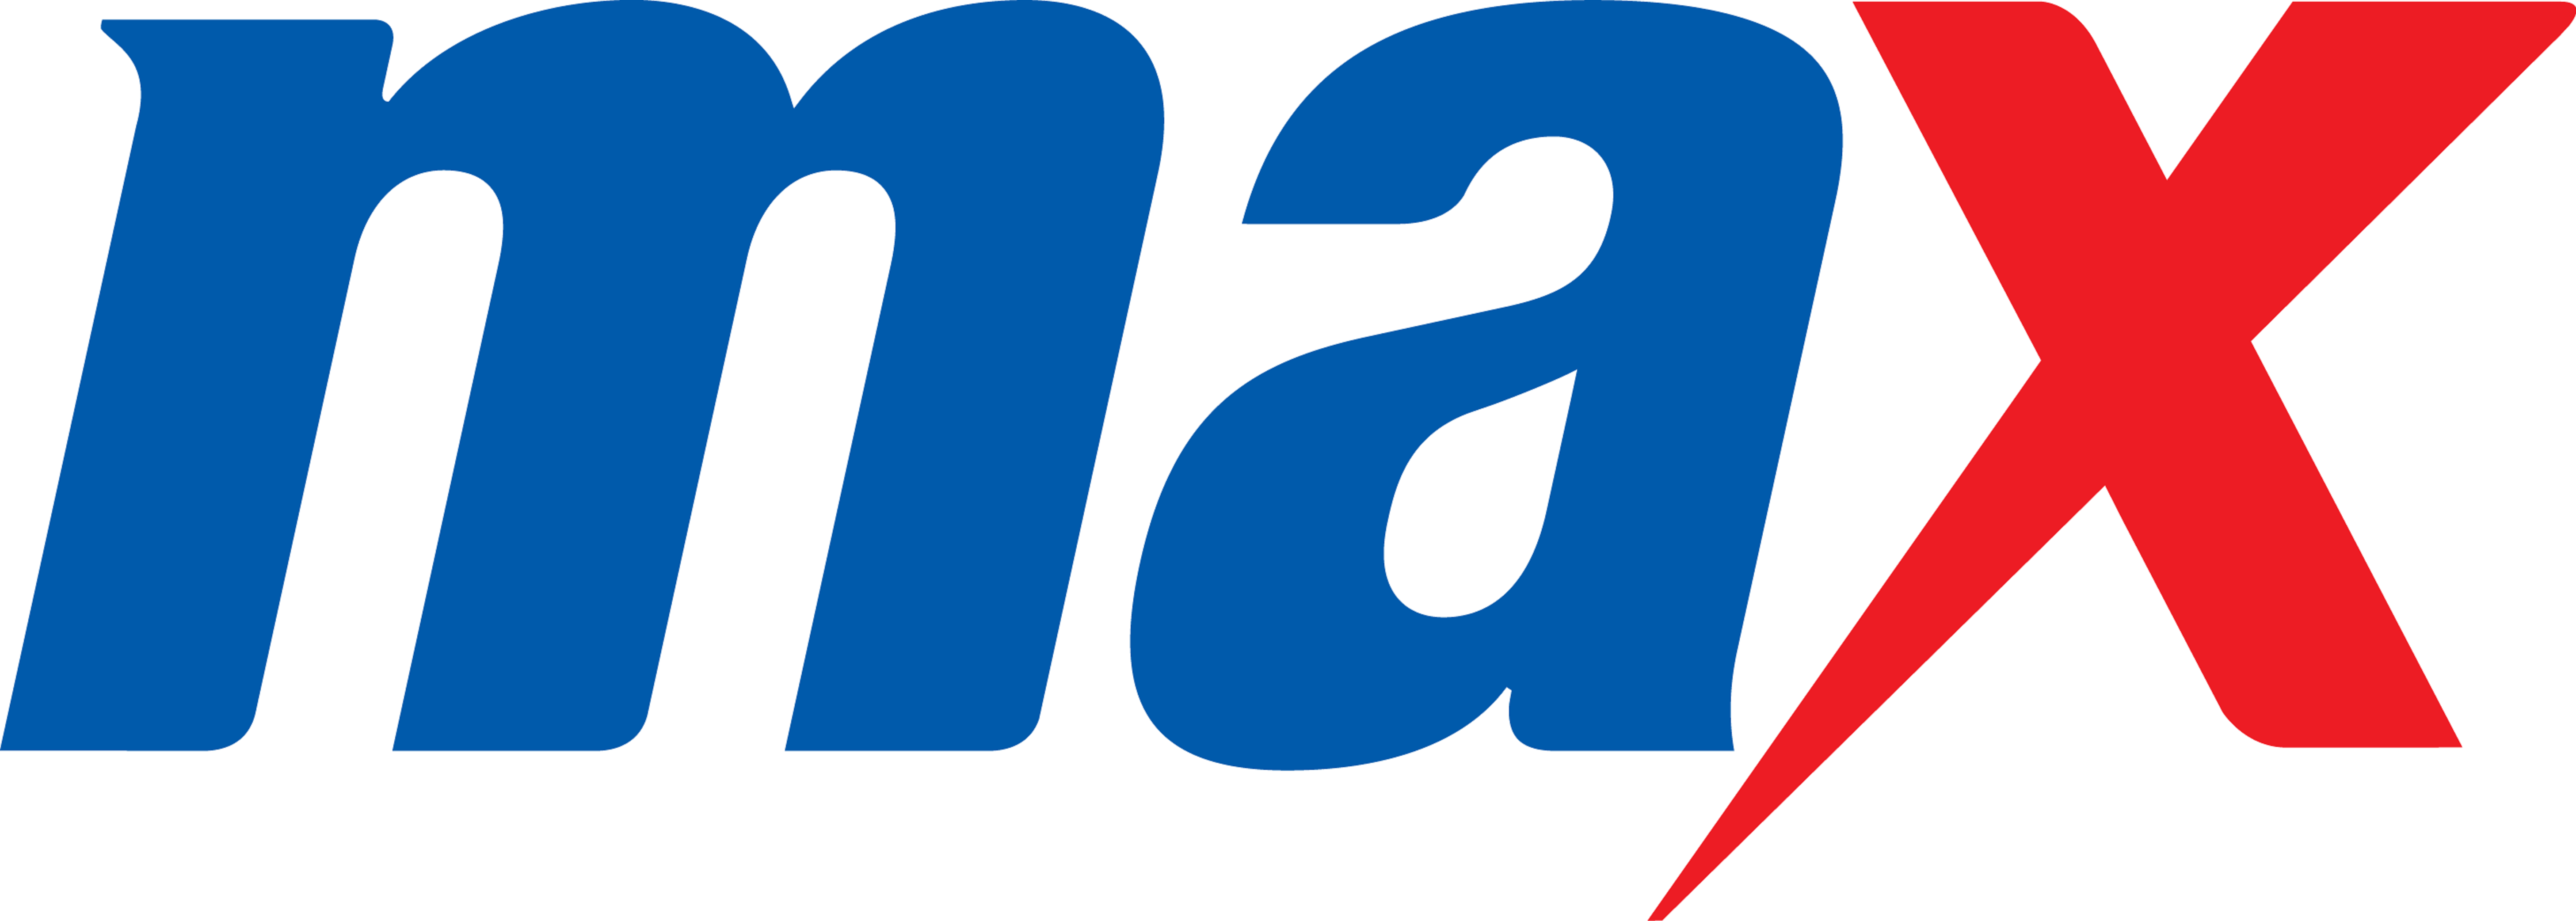 Max Logo - Logo of Max Fashion and Accessories, March 2018.png